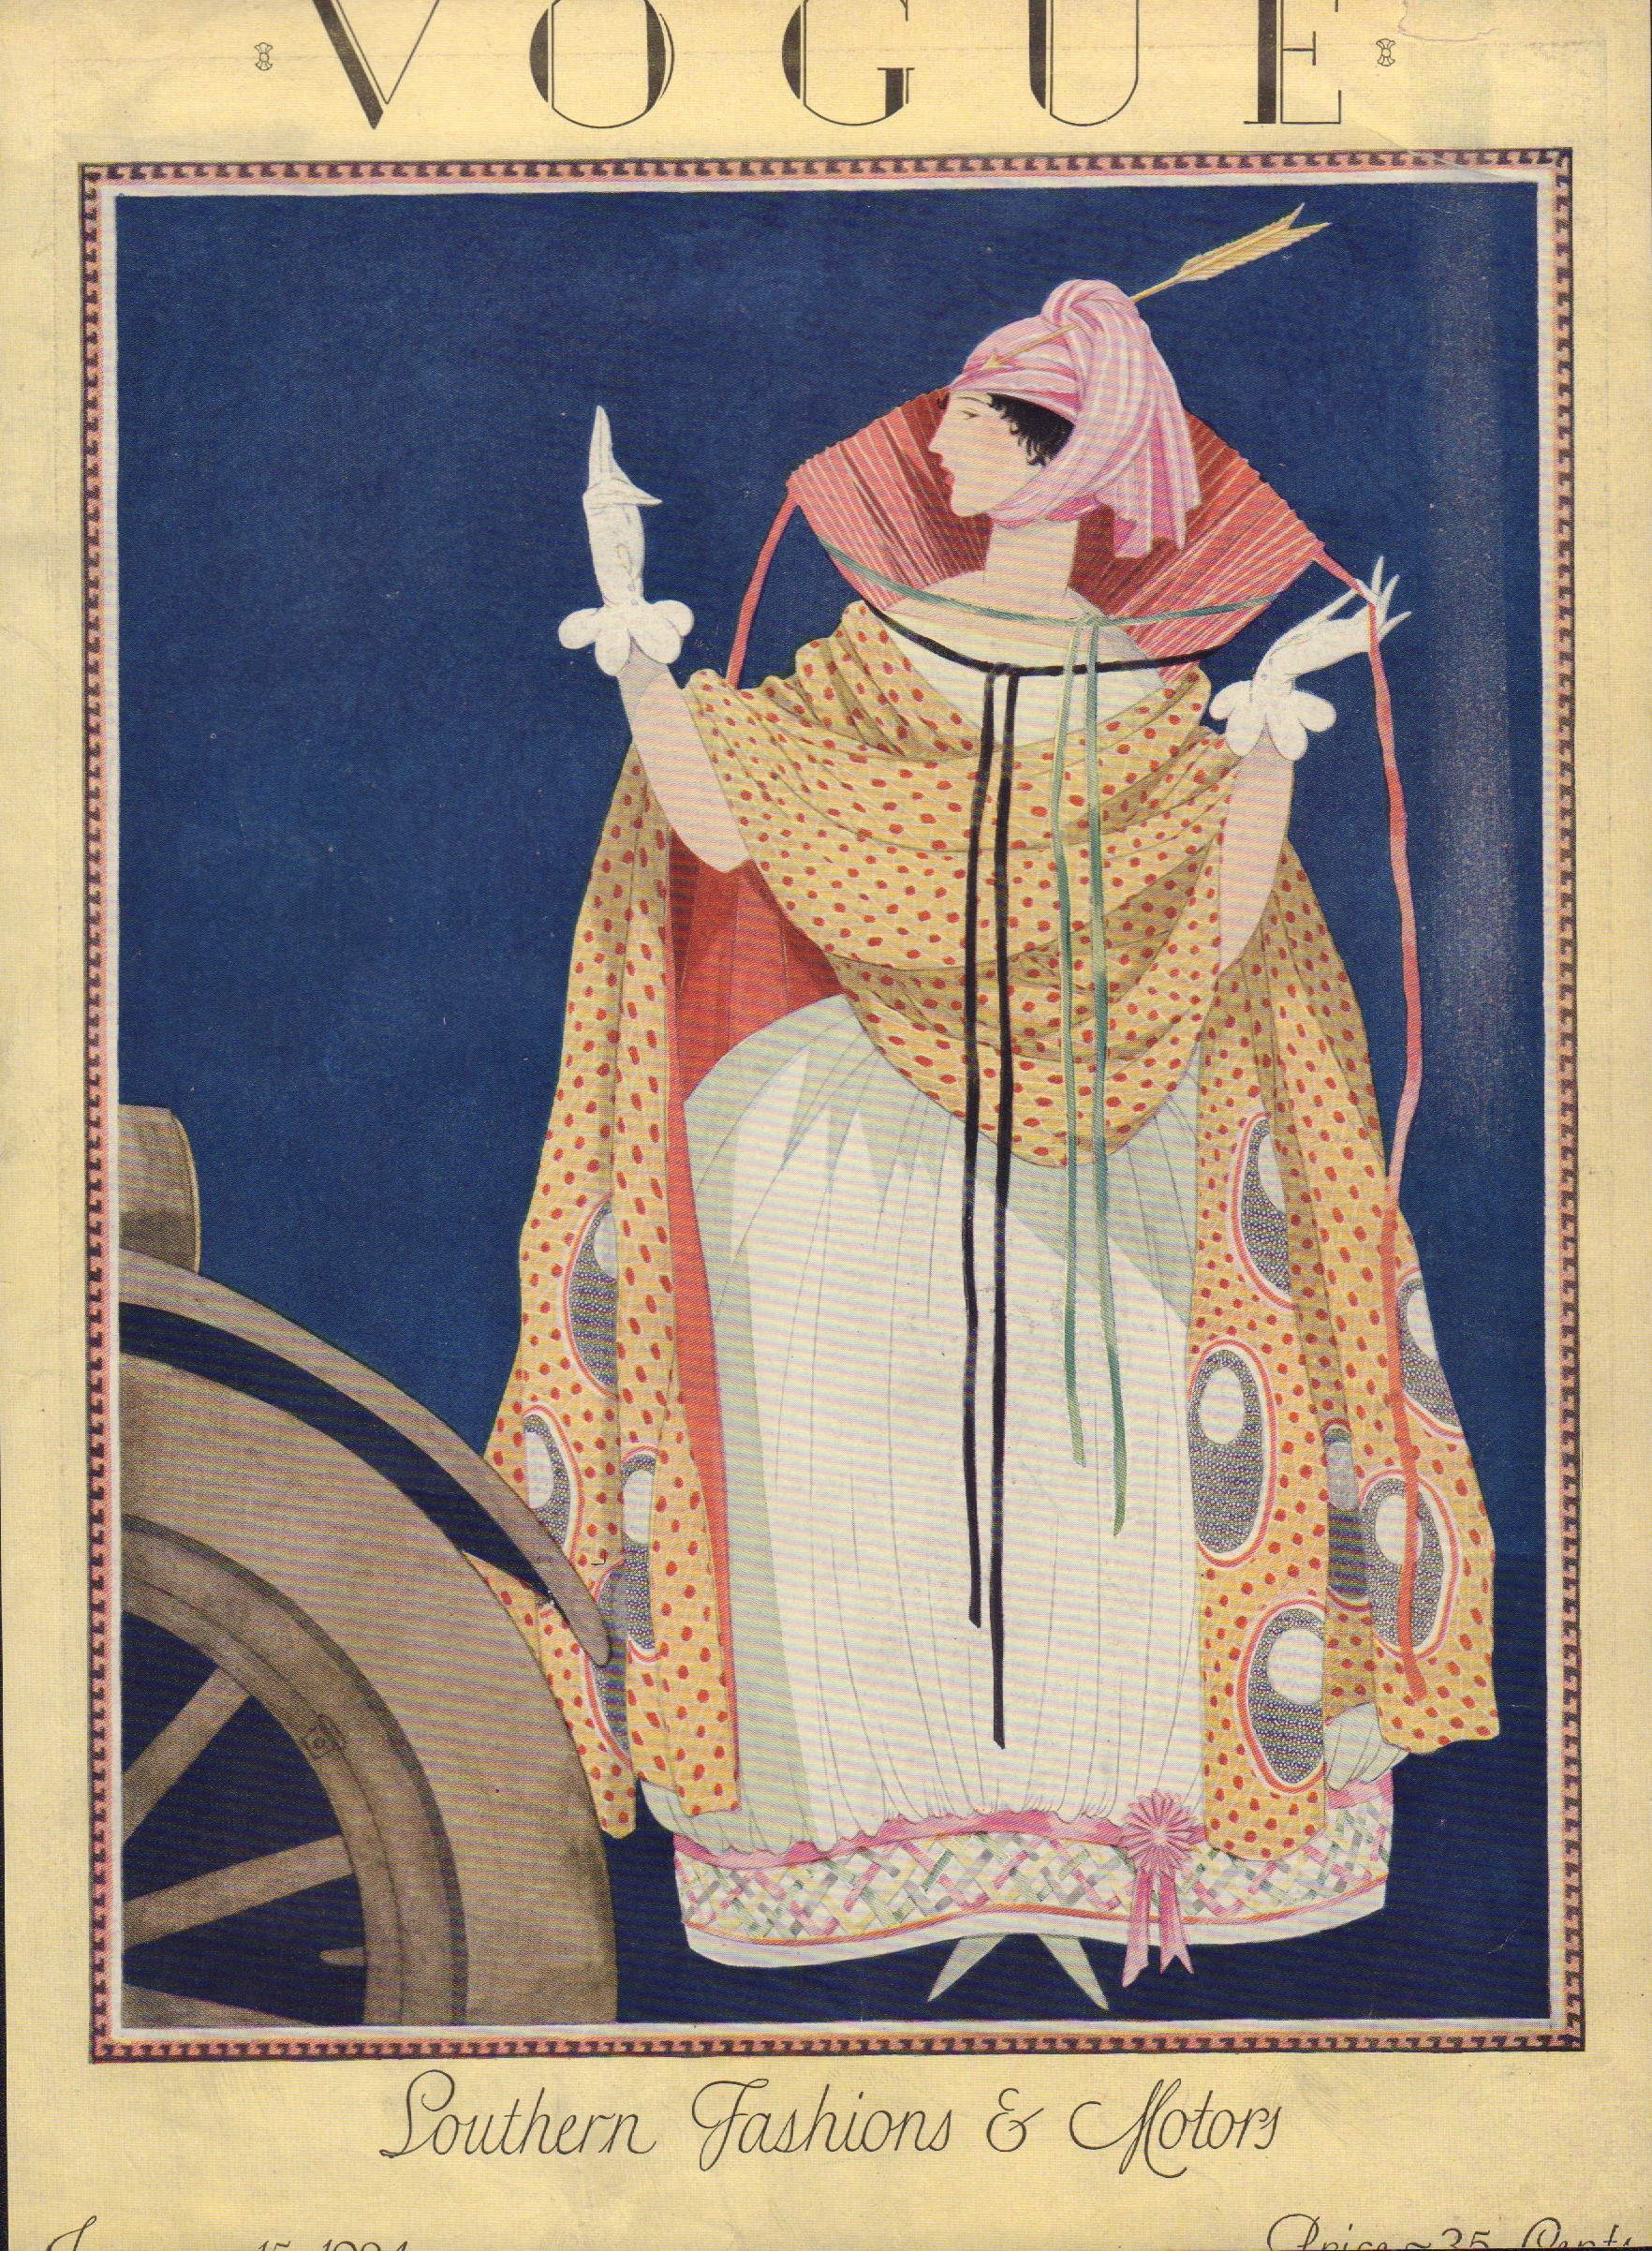 A Magazine Cover For Vanity Fair Of A Girl by George Wolfe Plank